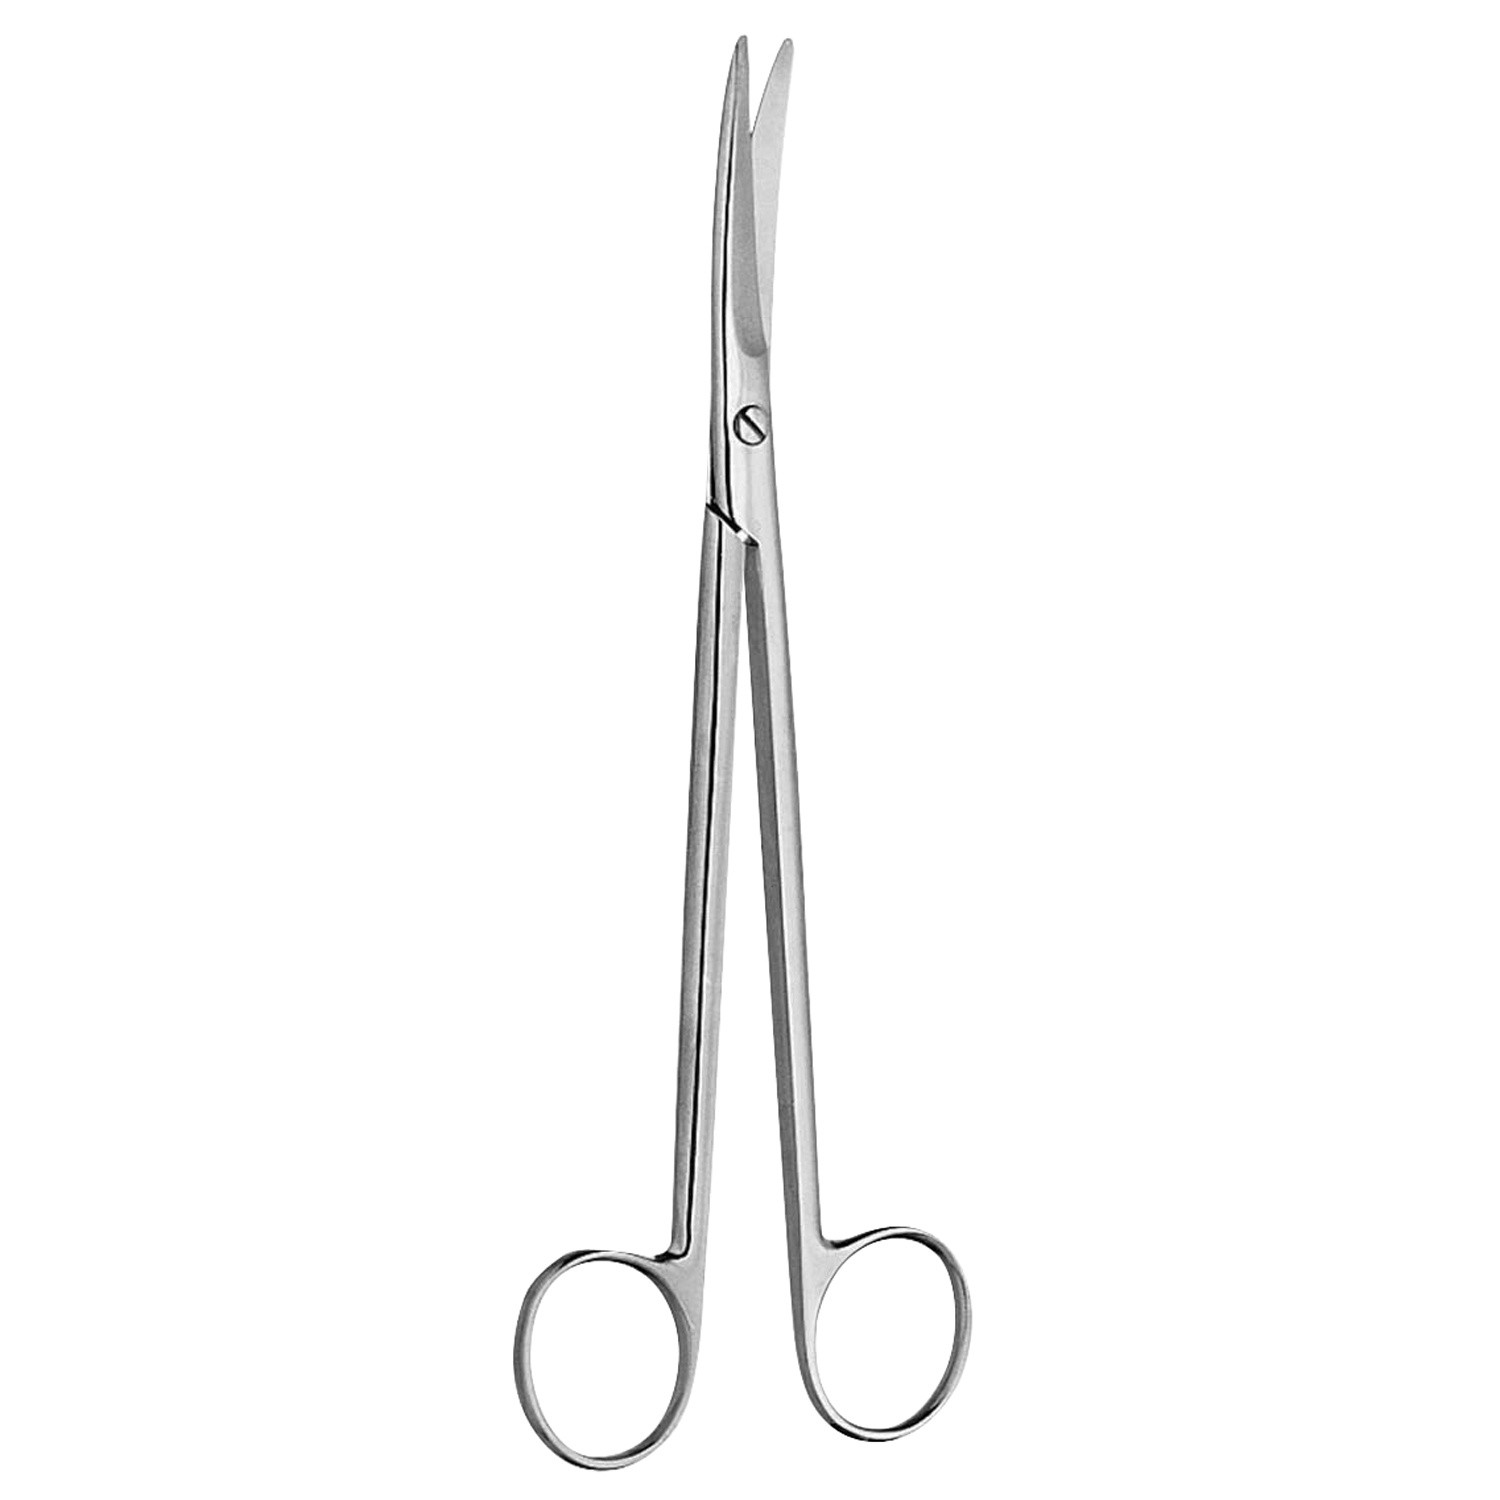 Cooley Cardiovascular Scissors, Curved On Flat, Mayo-Type Tips, 7 1/4" (18.5 Cm)